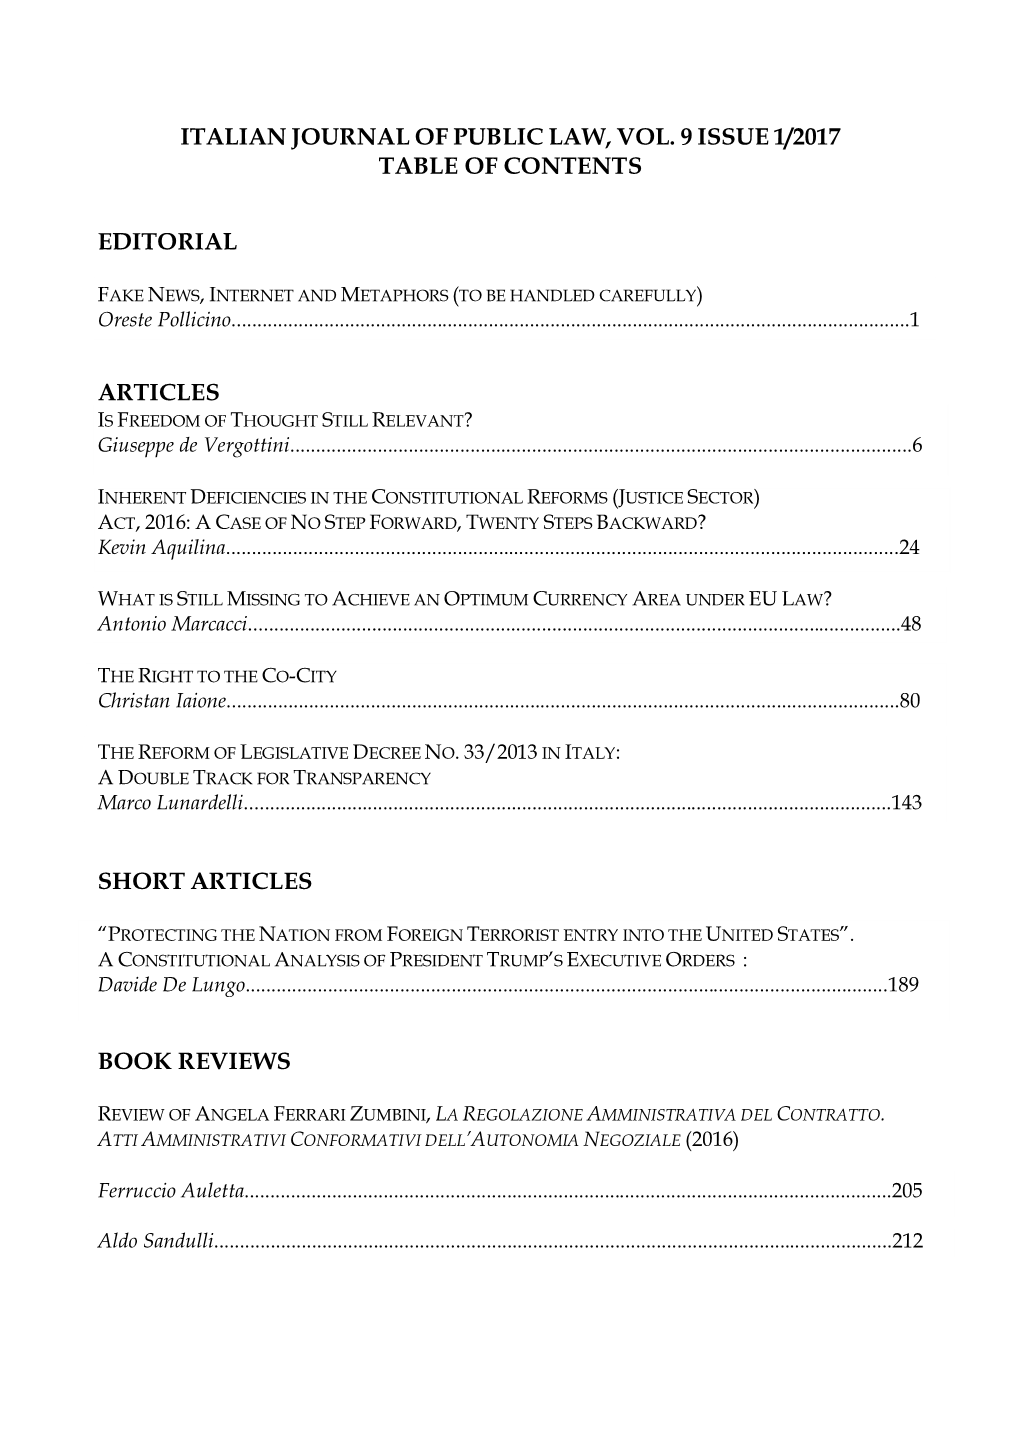 Italian Journal of Public Law, Vol. 9 Issue 1/2017 Table of Contents Editorial Articles Short Articles Book Reviews